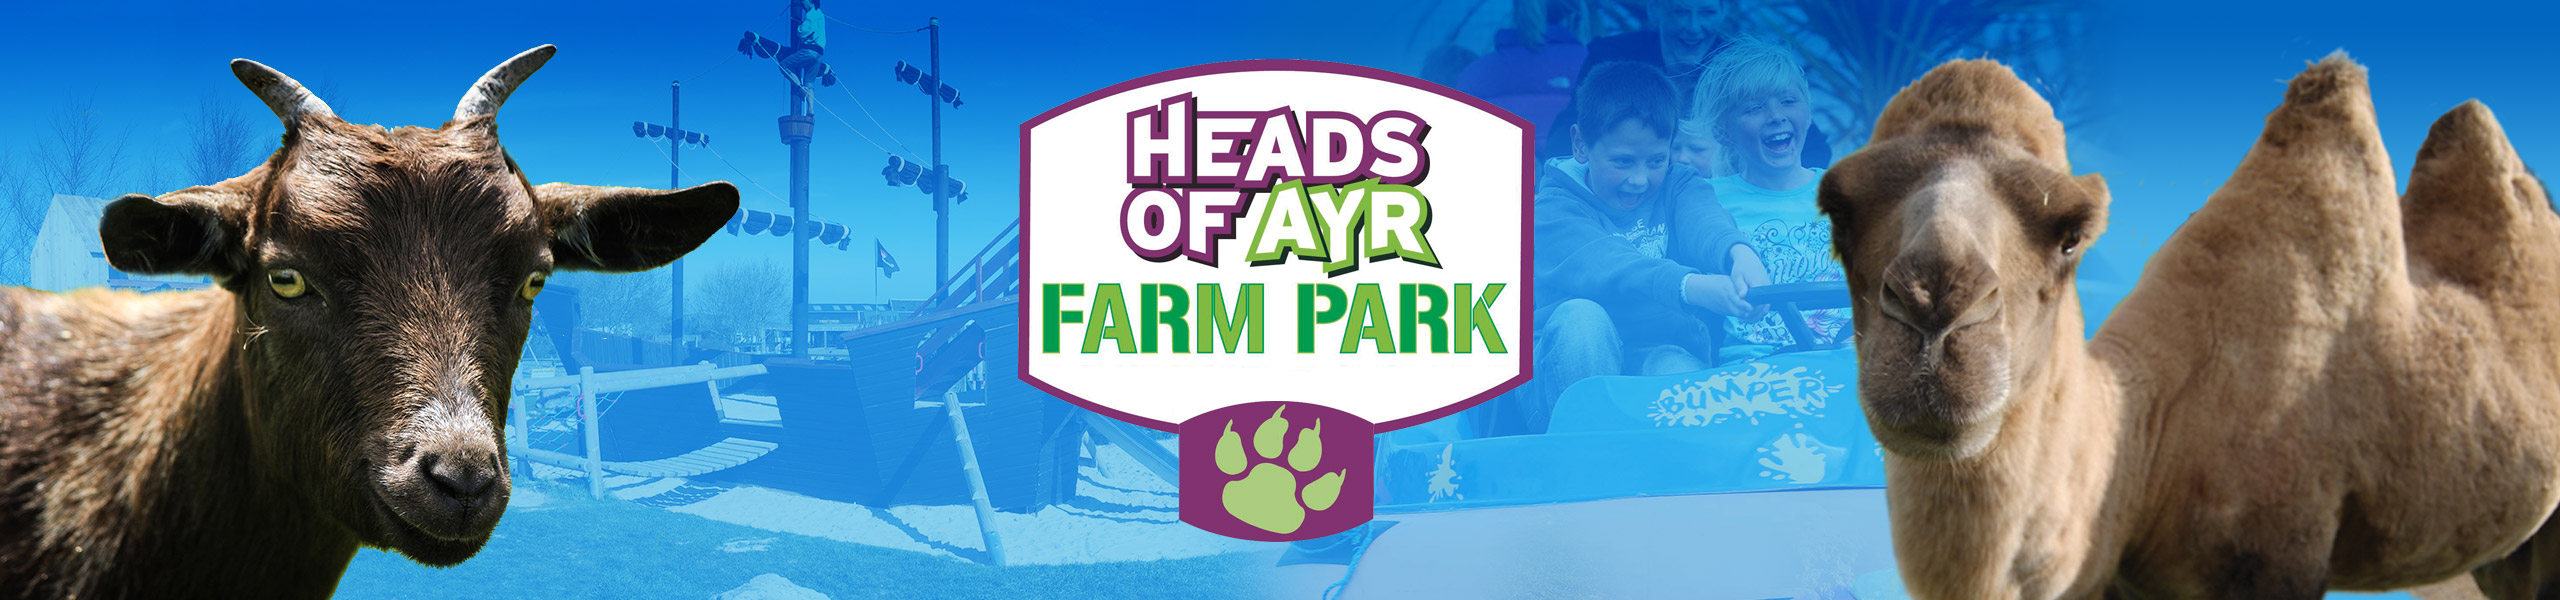 Heads of Ayr Farm Park logo with alpaca and pygmy goat in foreground